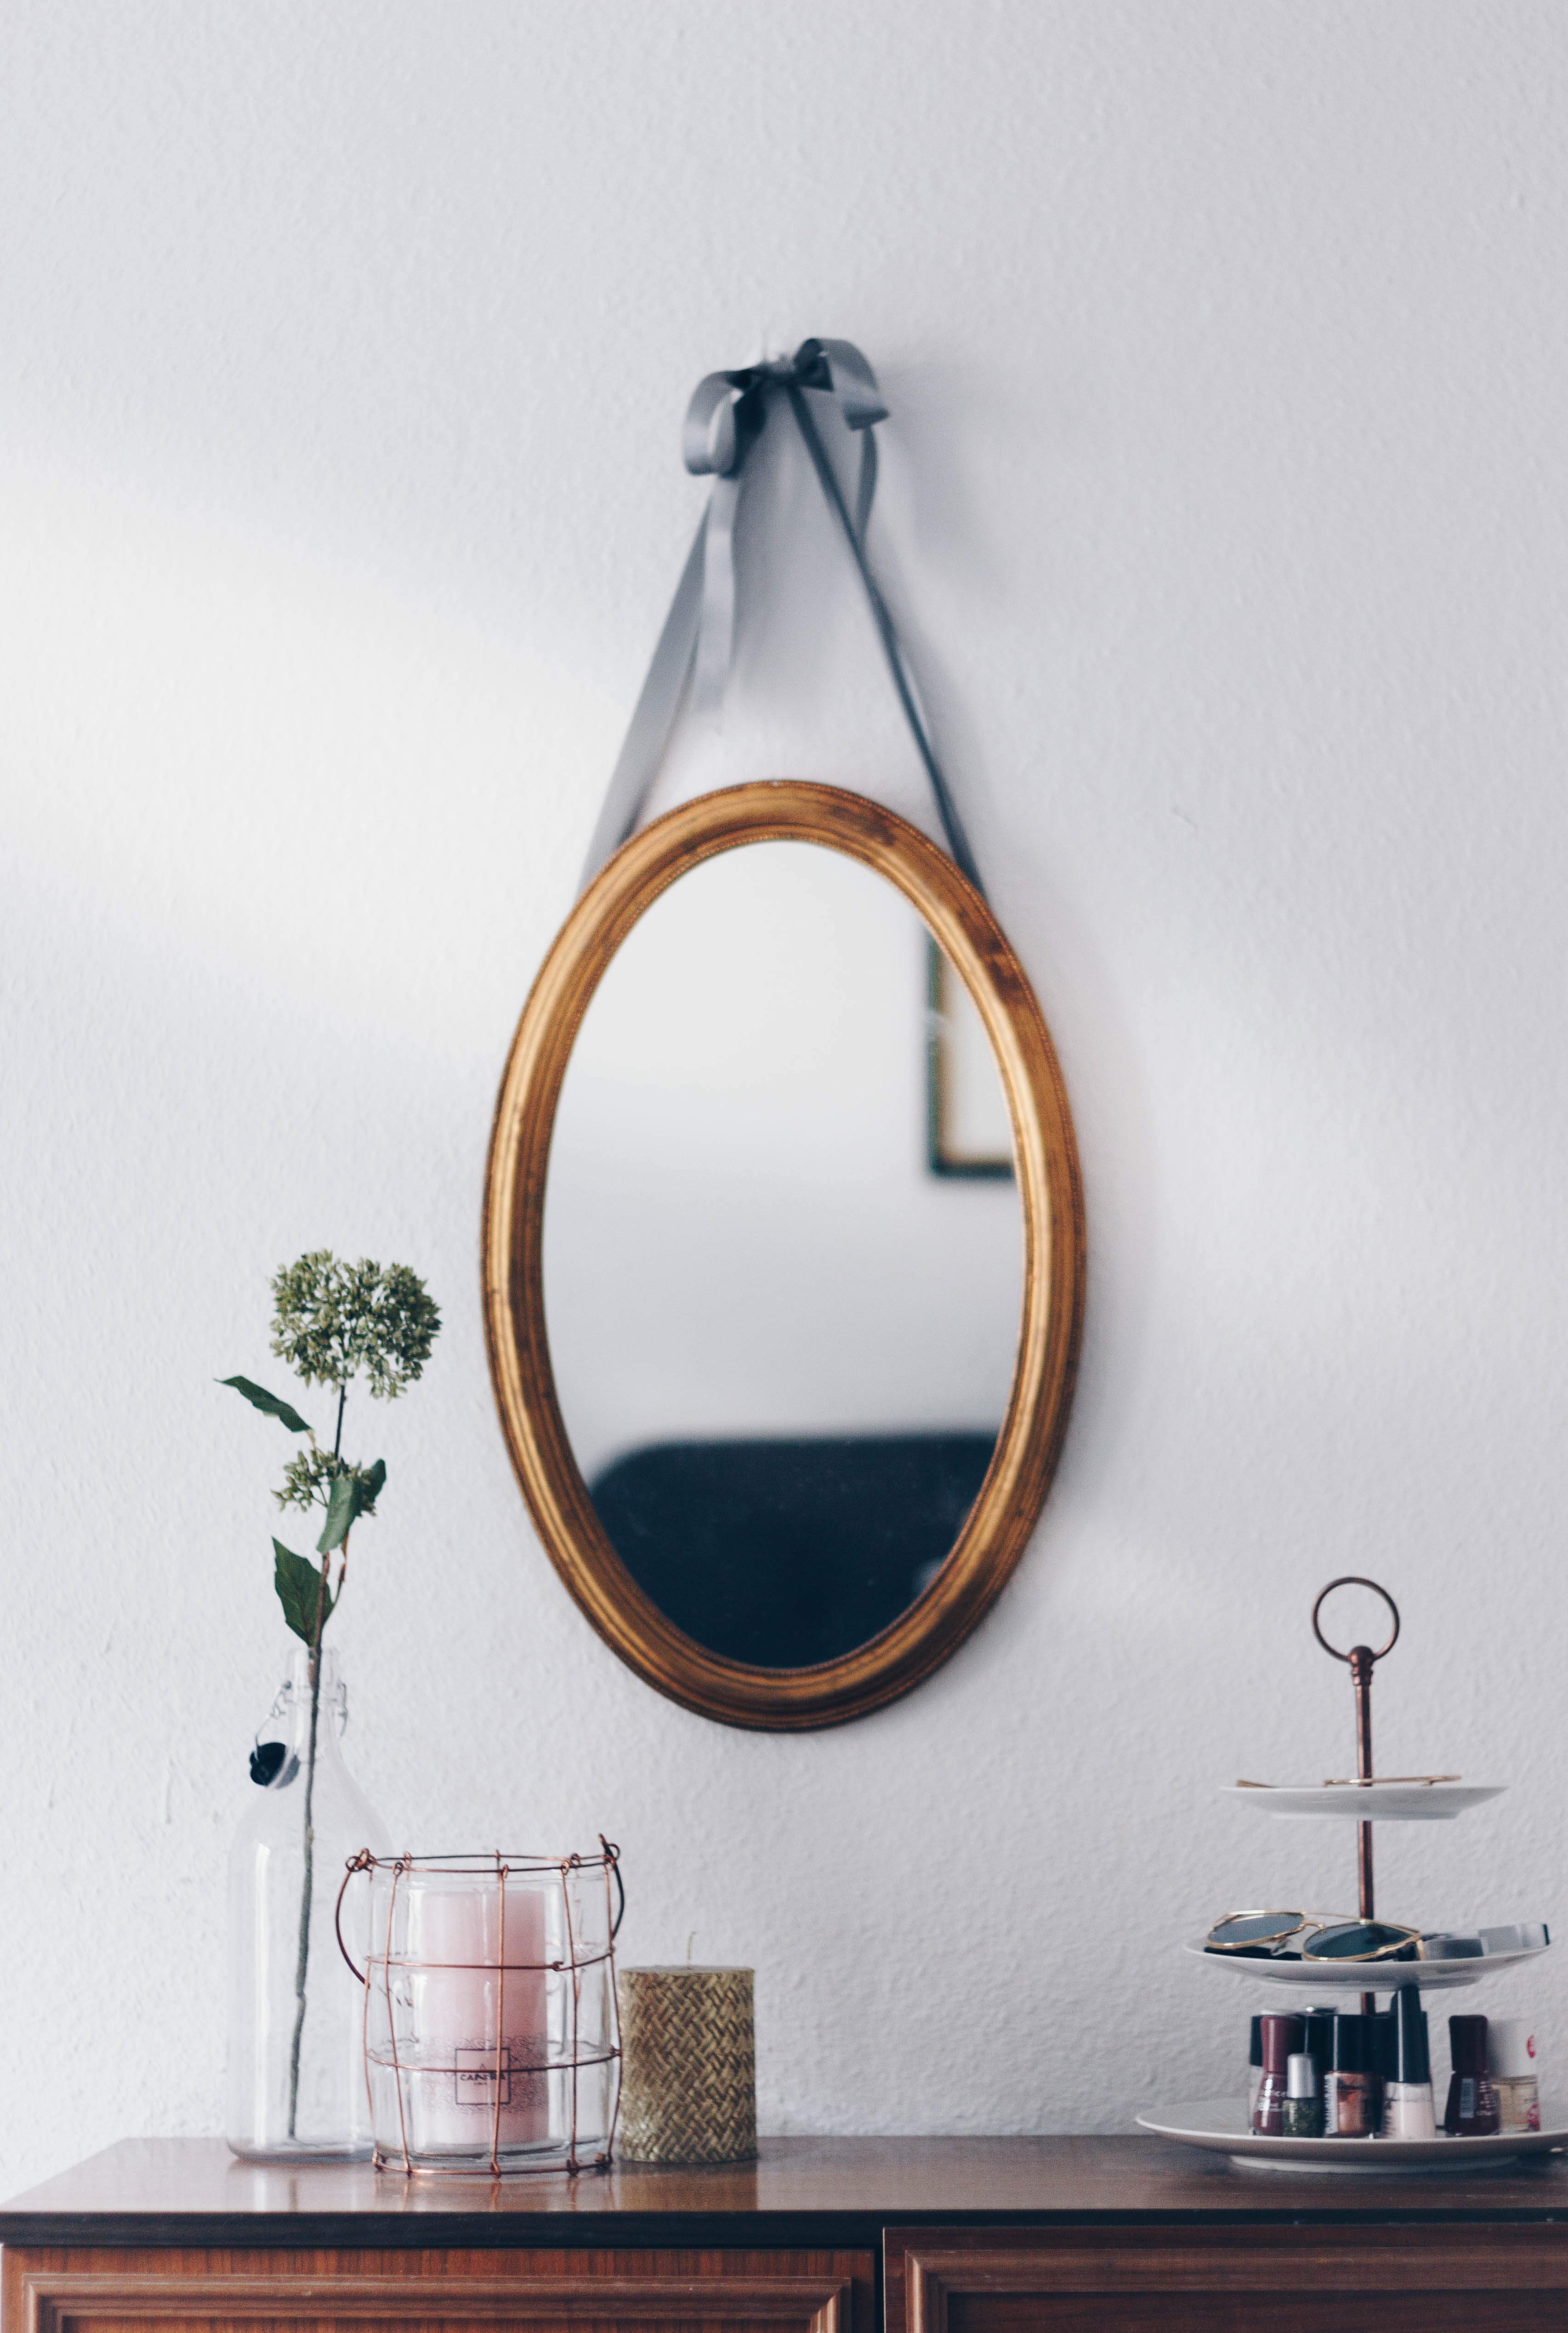 A mirror hanging above a table